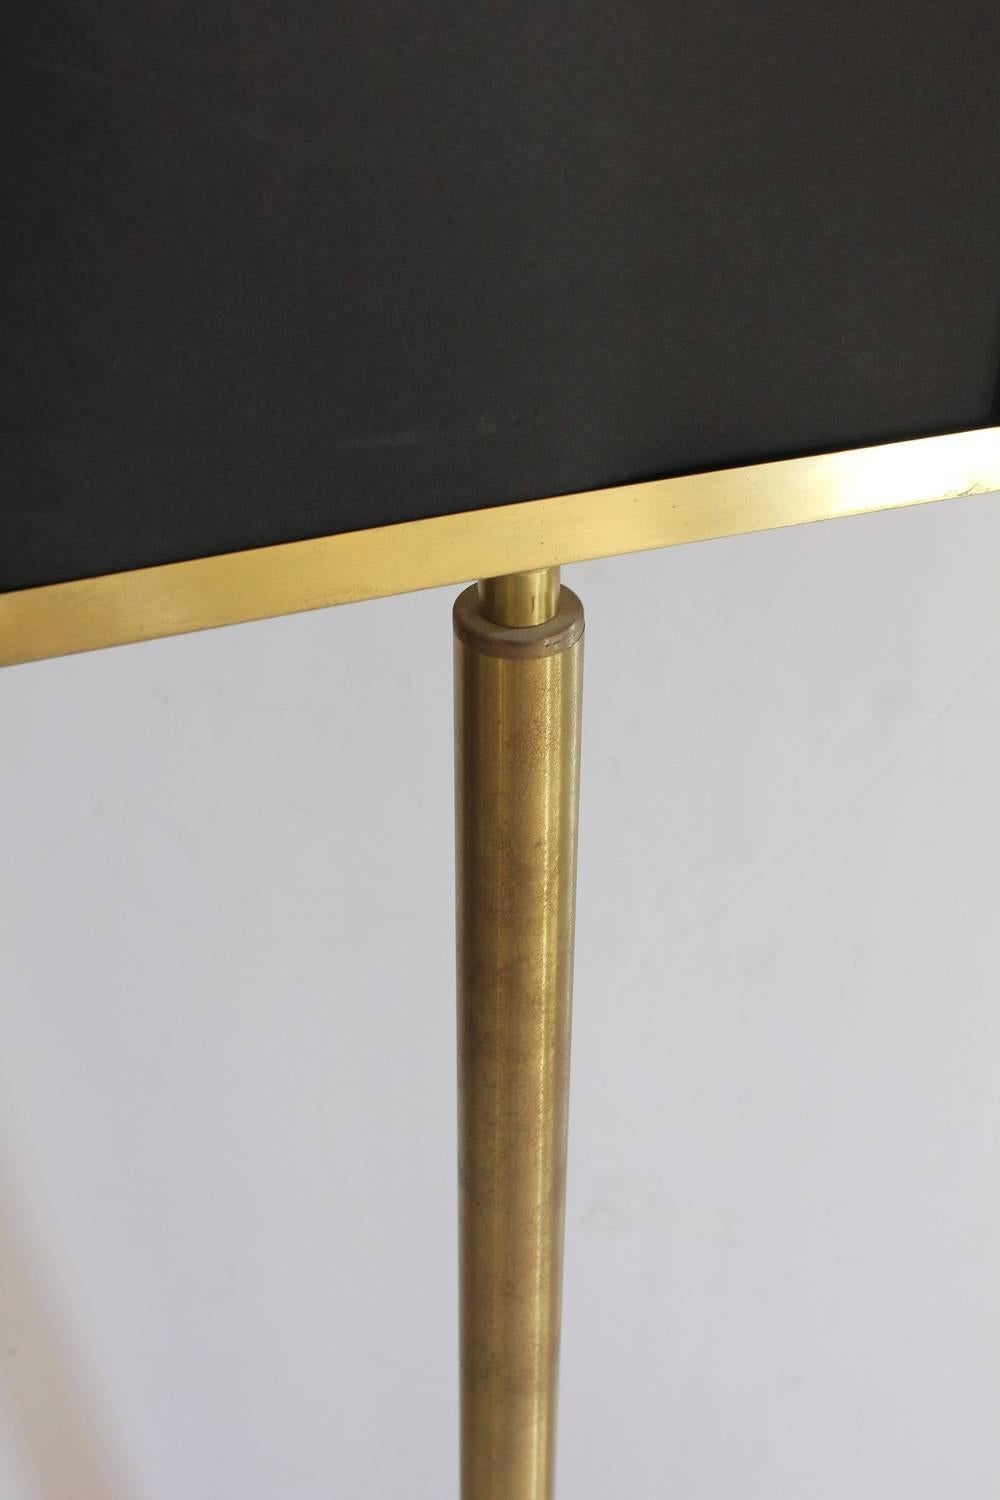 Vintage restaurant double sided sign floor brass stand. Size of sign: 13.5